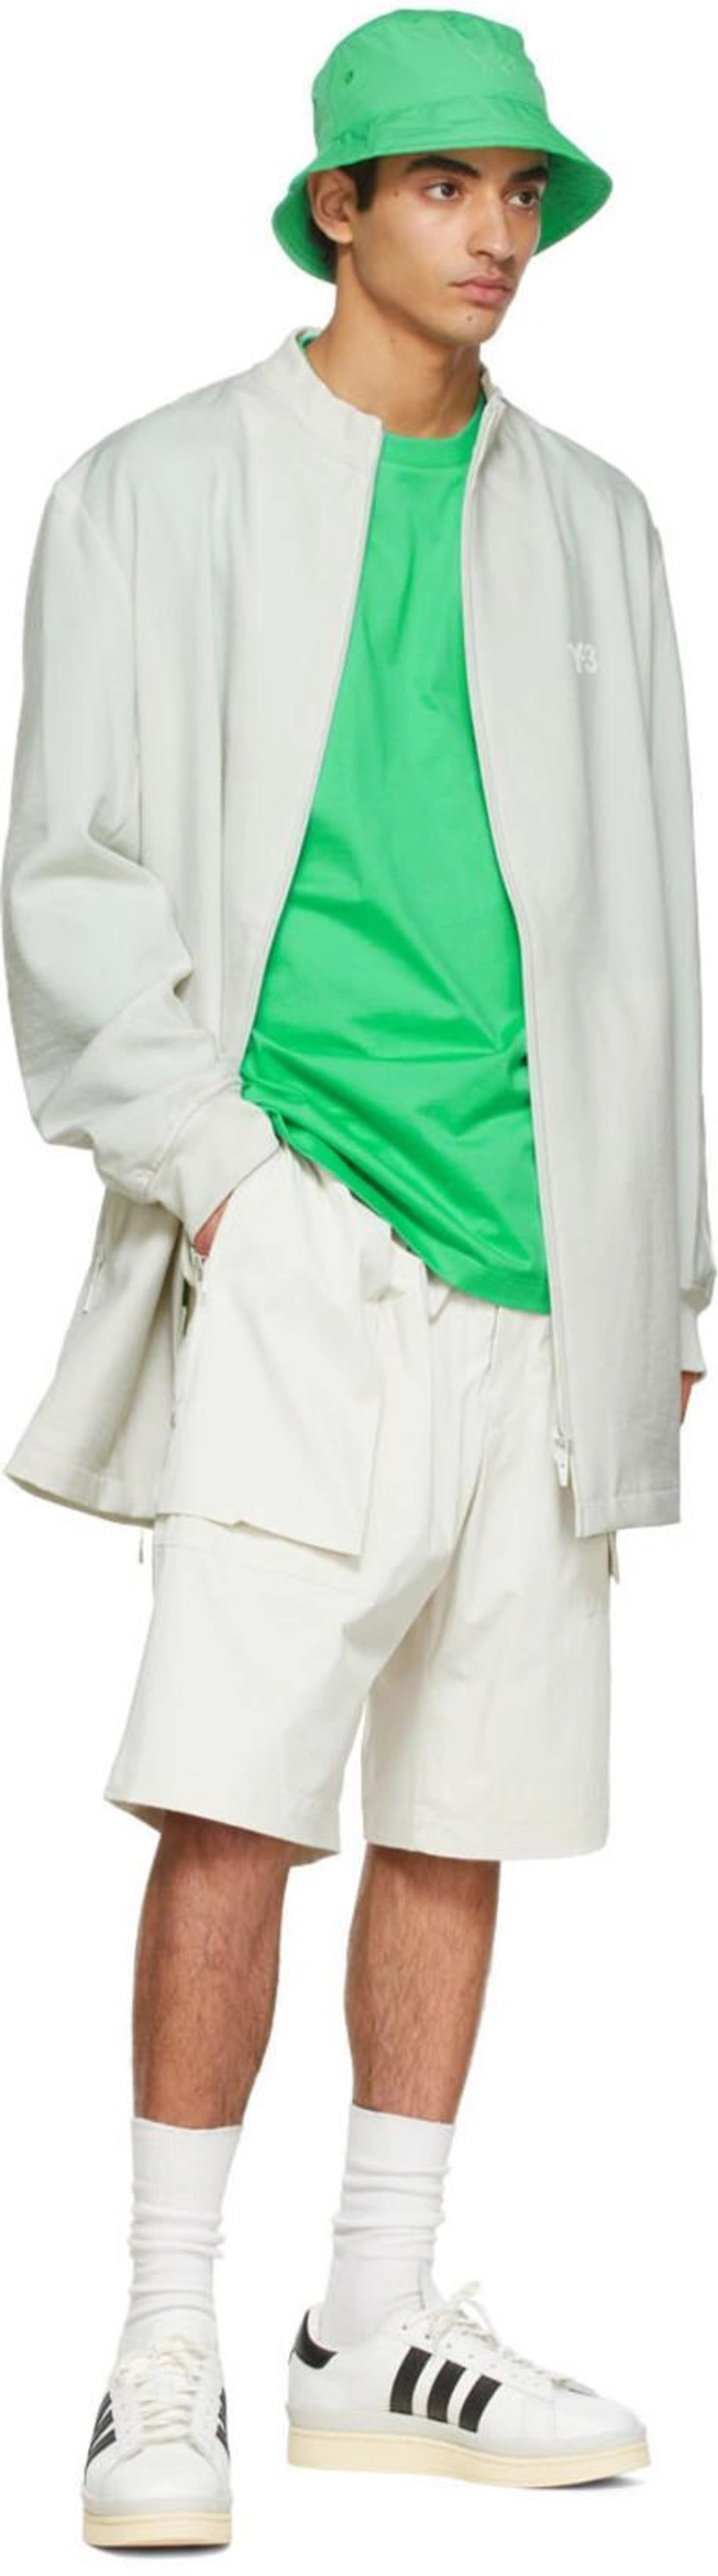 SSENSE's Post | 搭配: Y-3 长袖t恤 In Semi Flash Lime；Y-3 Off-white Nylon Shorts In Talc；Y-3 Gray Polyester Jacket In Orbit Grey